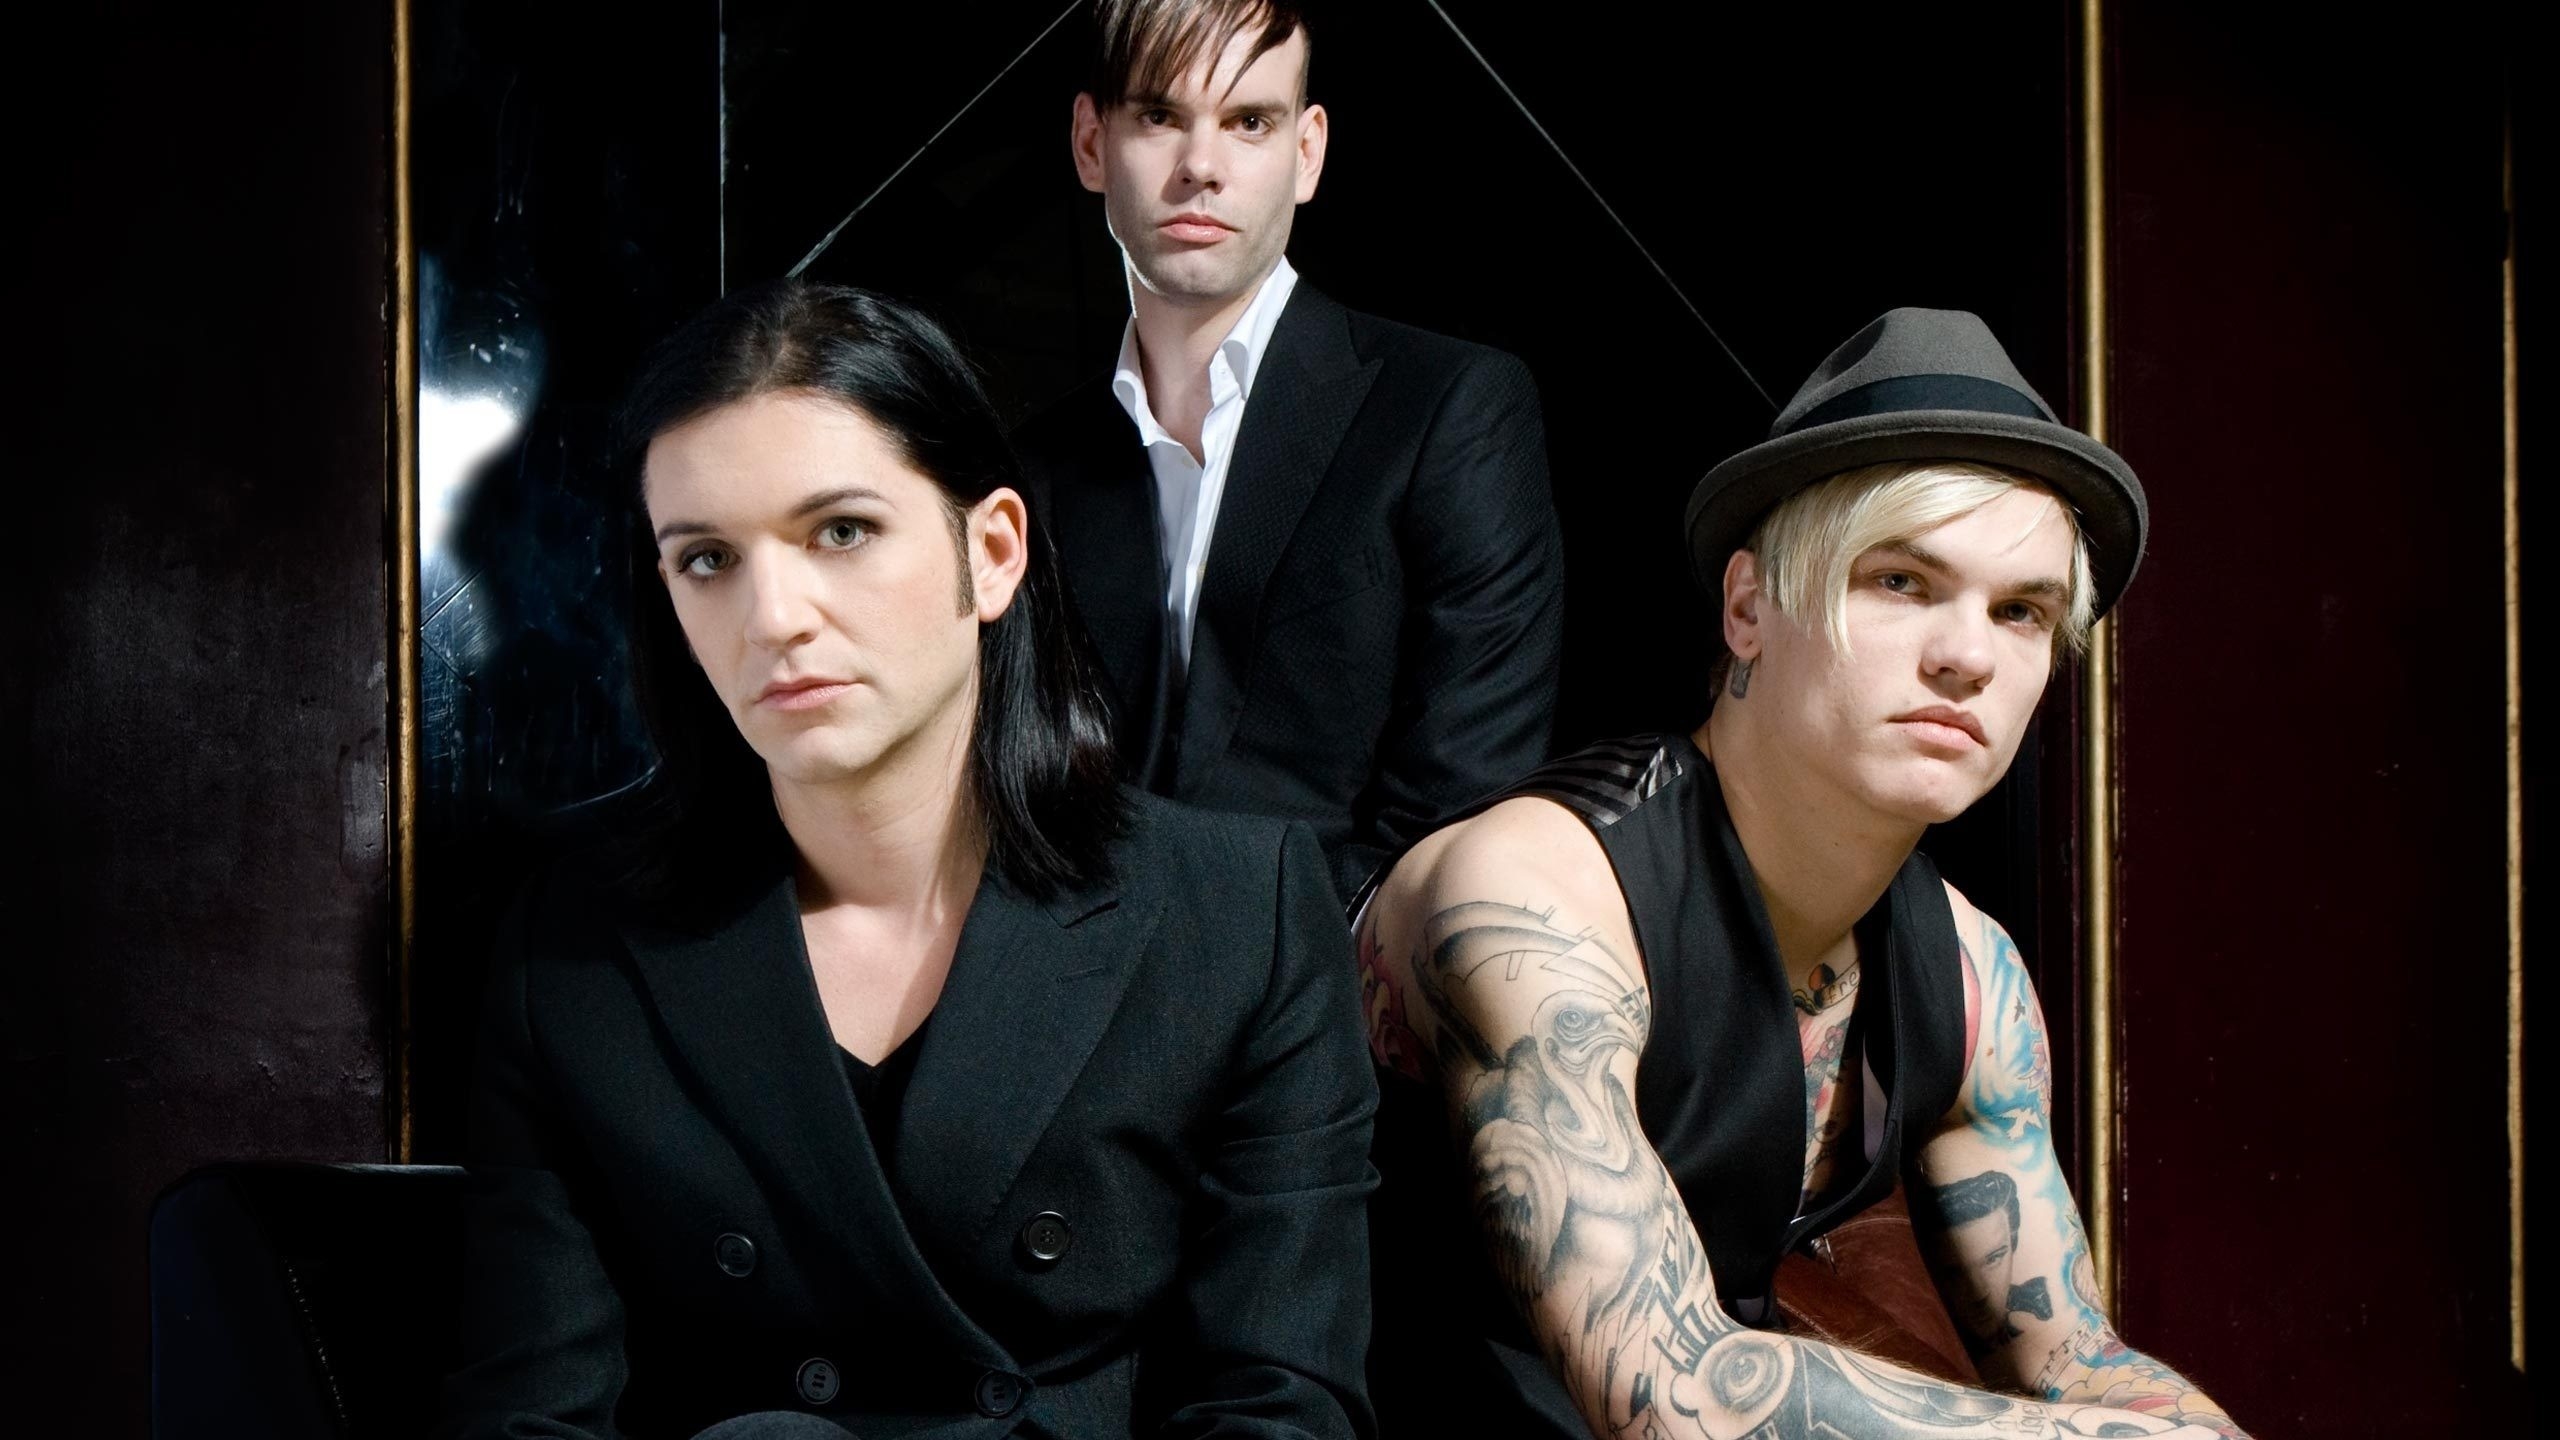 Placebo Band Poster for 2560x1440 HDTV resolution